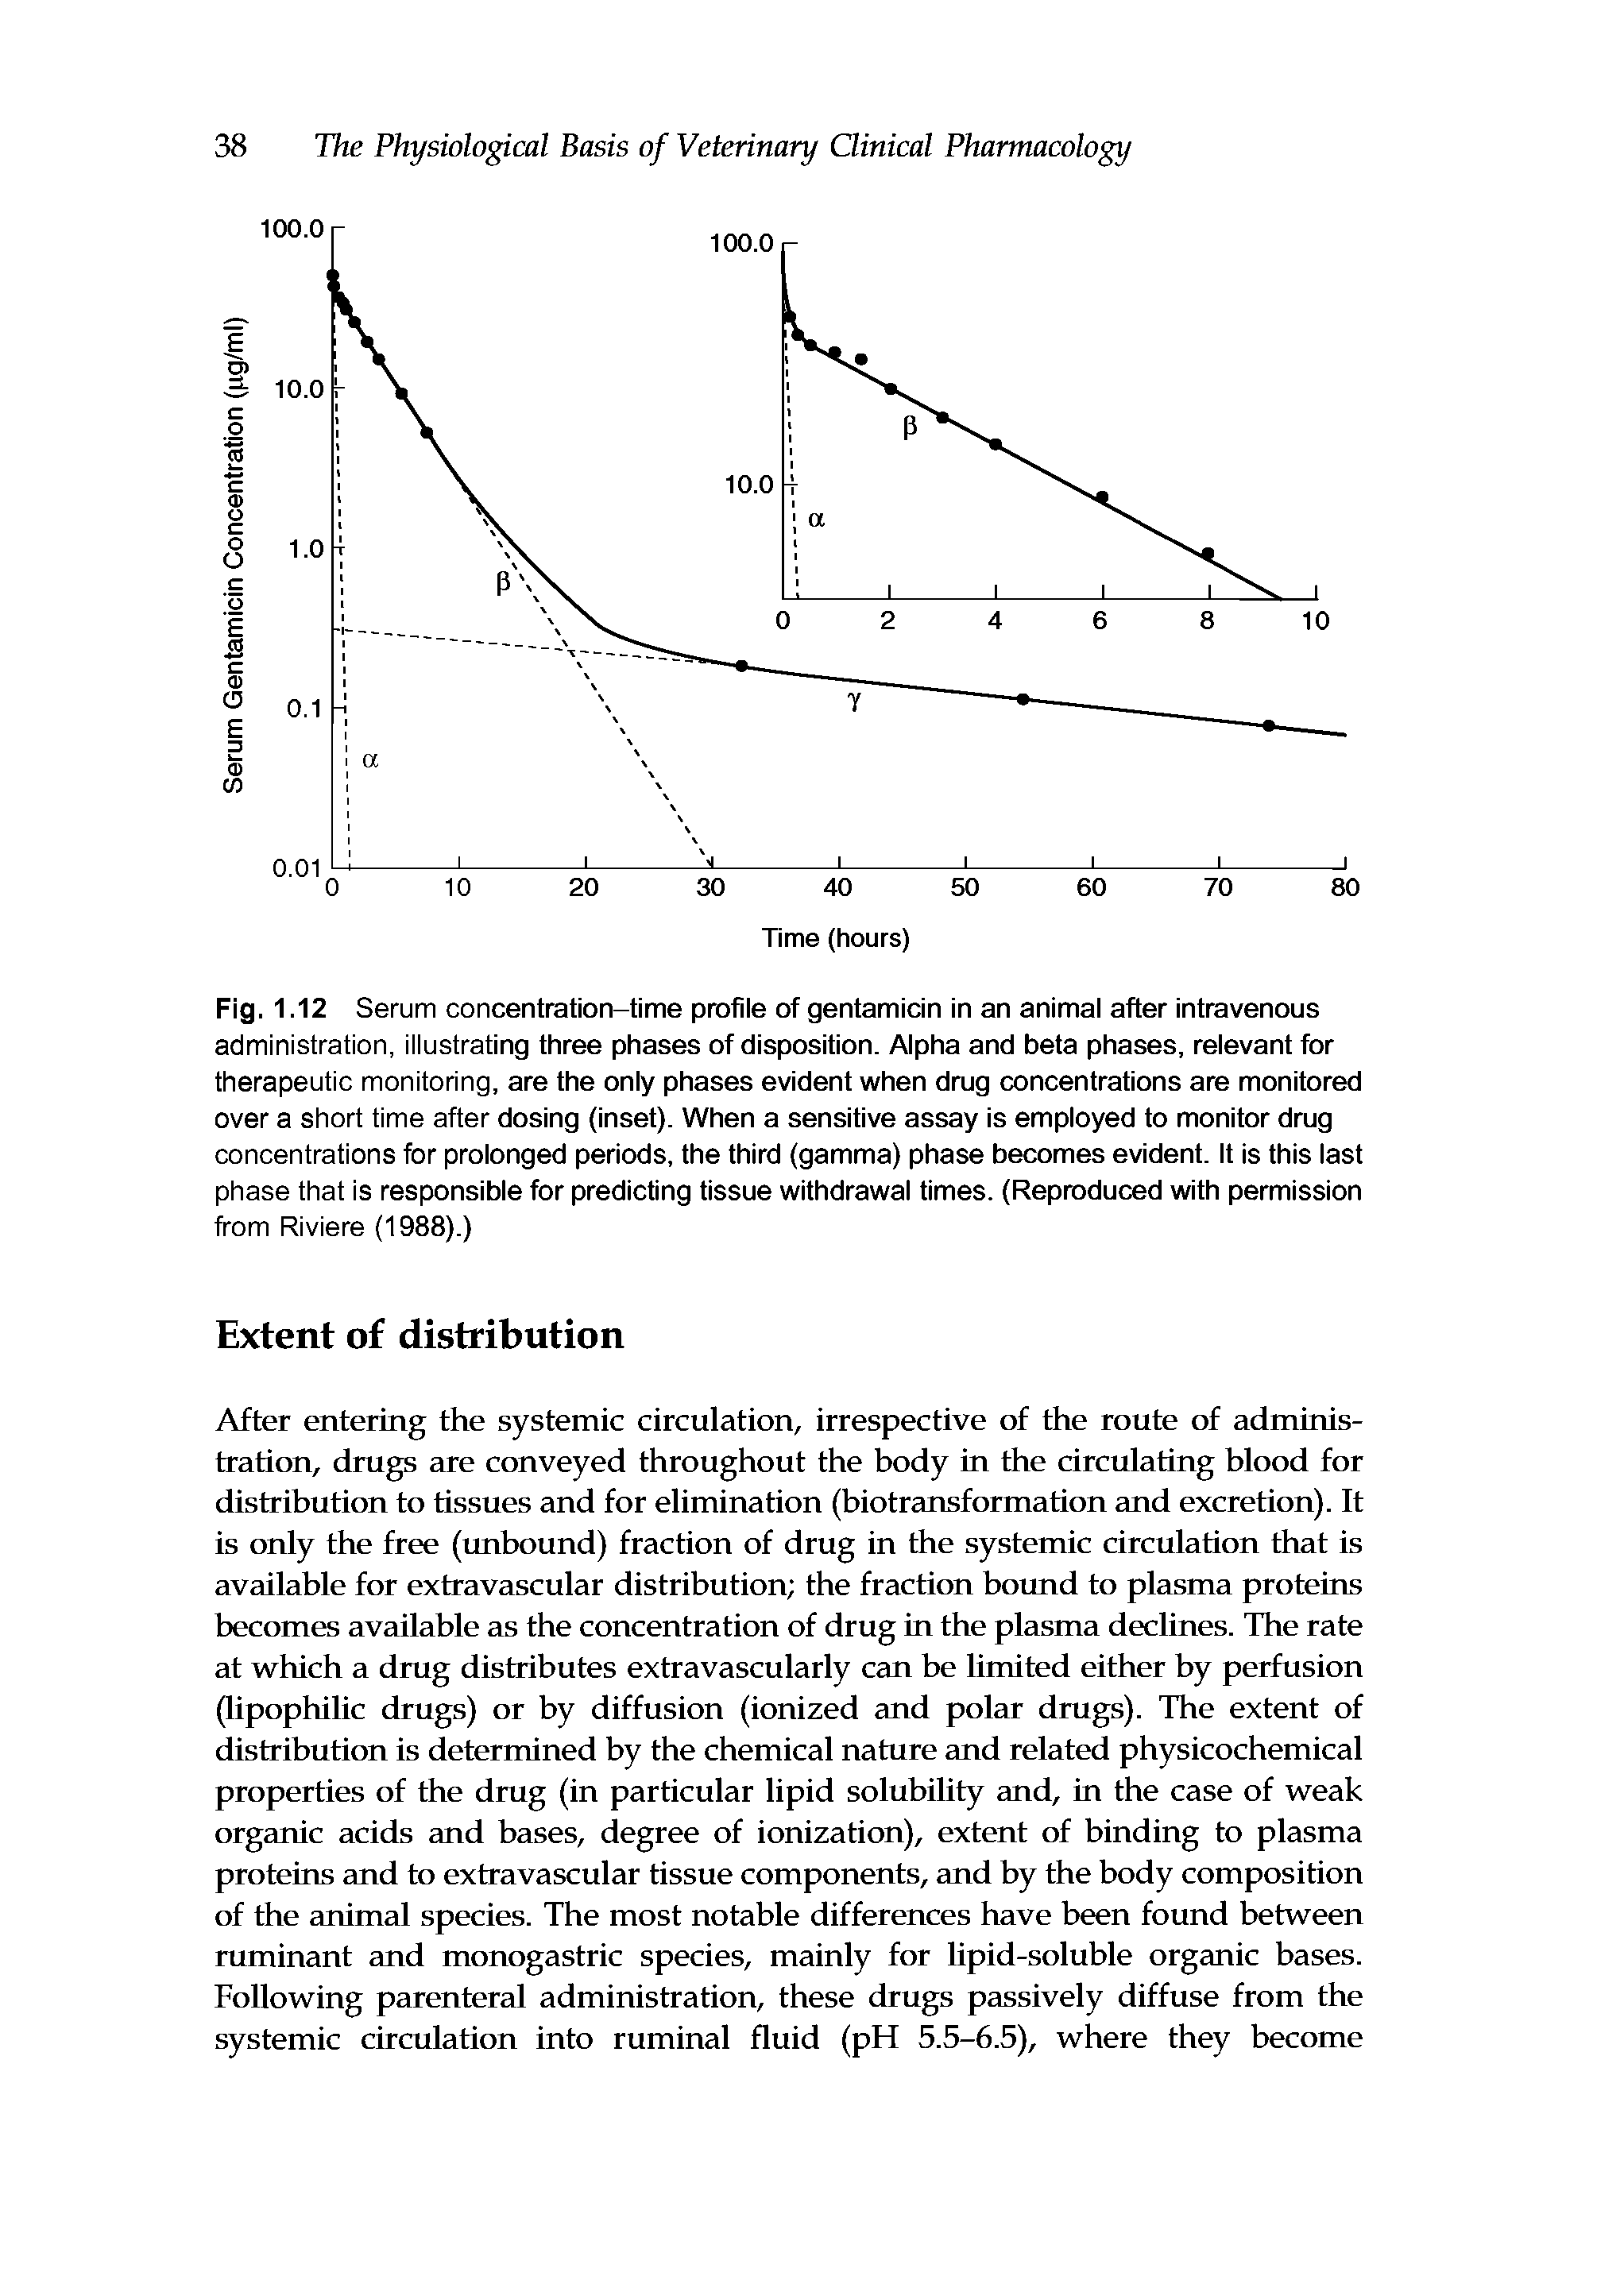 Fig. 1.12 Serum concentration-time profile of gentamicin in an animal after intravenous administration, illustrating three phases of disposition. Alpha and beta phases, relevant for therapeutic monitoring, are the only phases evident when drug concentrations are monitored over a short time after dosing (inset). When a sensitive assay is employed to monitor drug concentrations for prolonged periods, the third (gamma) phase becomes evident. It is this last phase that is responsible for predicting tissue withdrawal times. (Reproduced with permission from Riviere (1988).)...